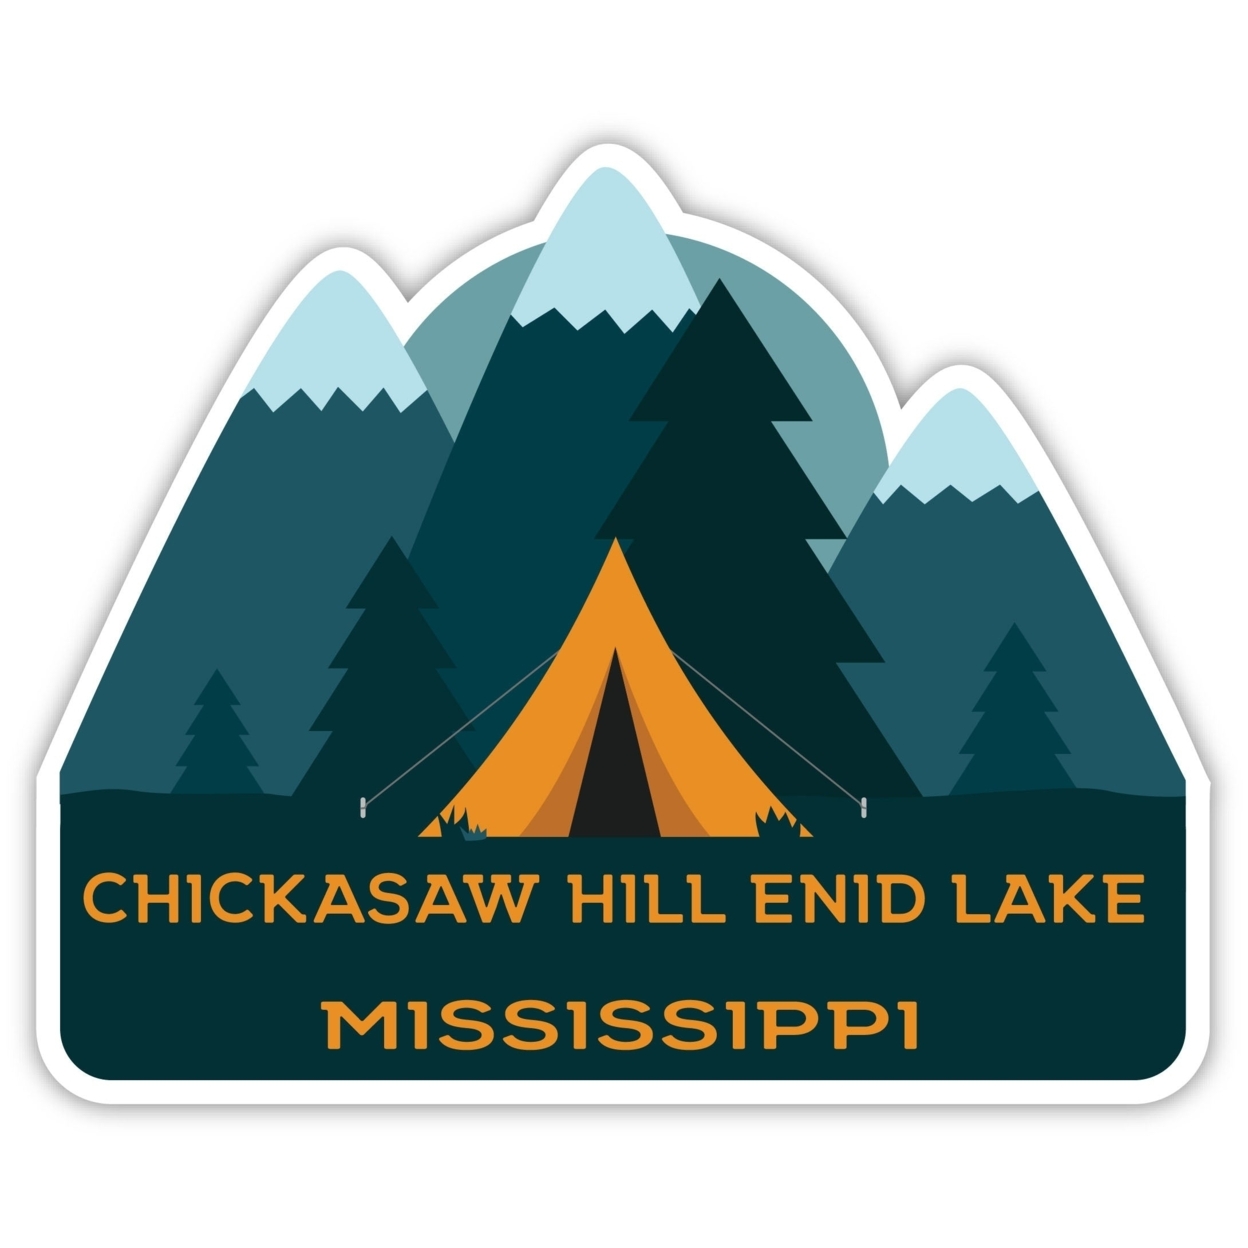 Chickasaw Hill Enid Lake Mississippi Souvenir Decorative Stickers (Choose Theme And Size) - Single Unit, 4-Inch, Tent